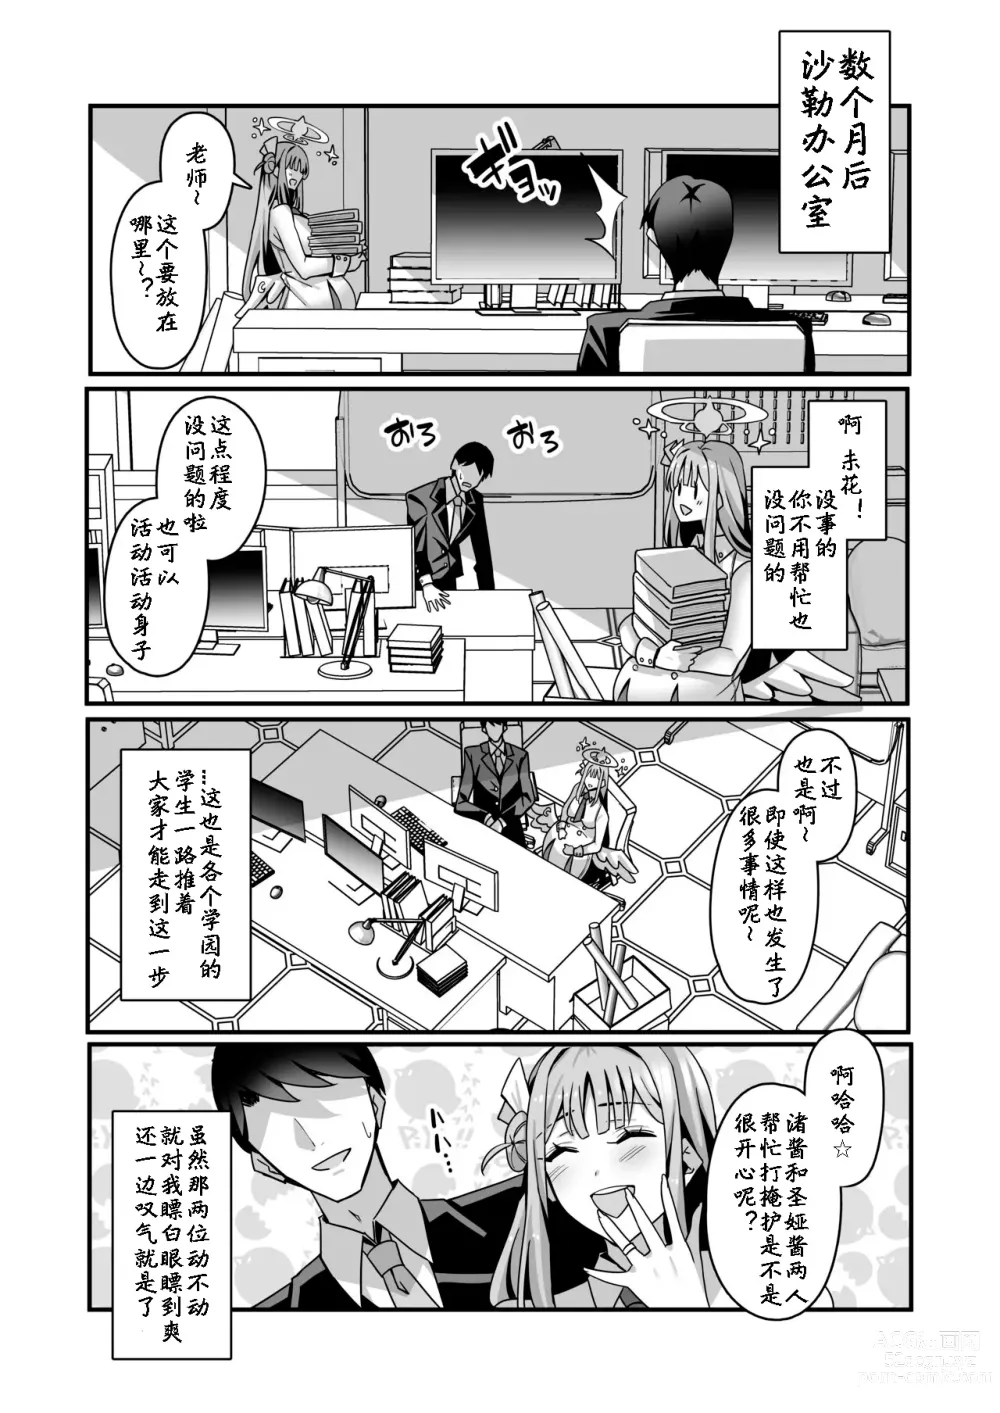 Page 24 of doujinshi Mika to Happy Love Love Sex Shite Haramaseru Hon - A book about happy loving sex with Mika and impregnation.